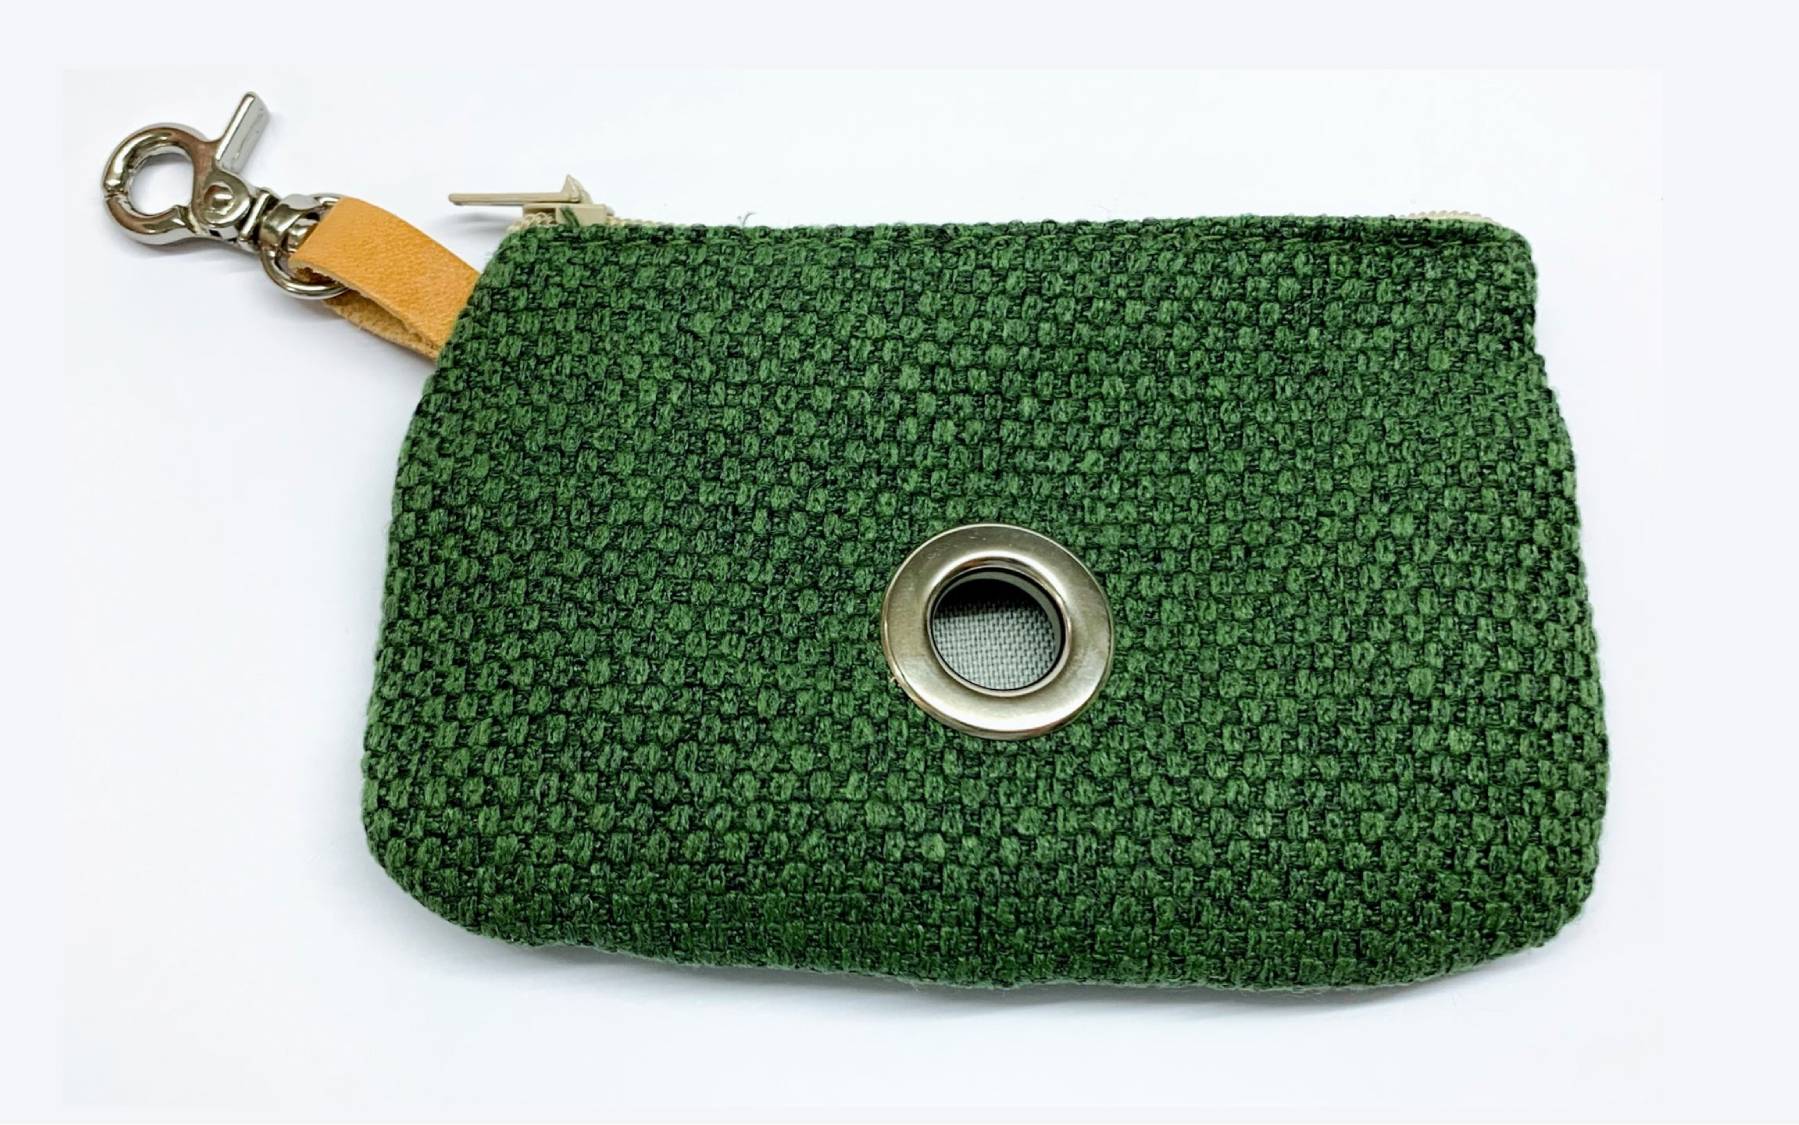 A product shot of the green poo bag holder